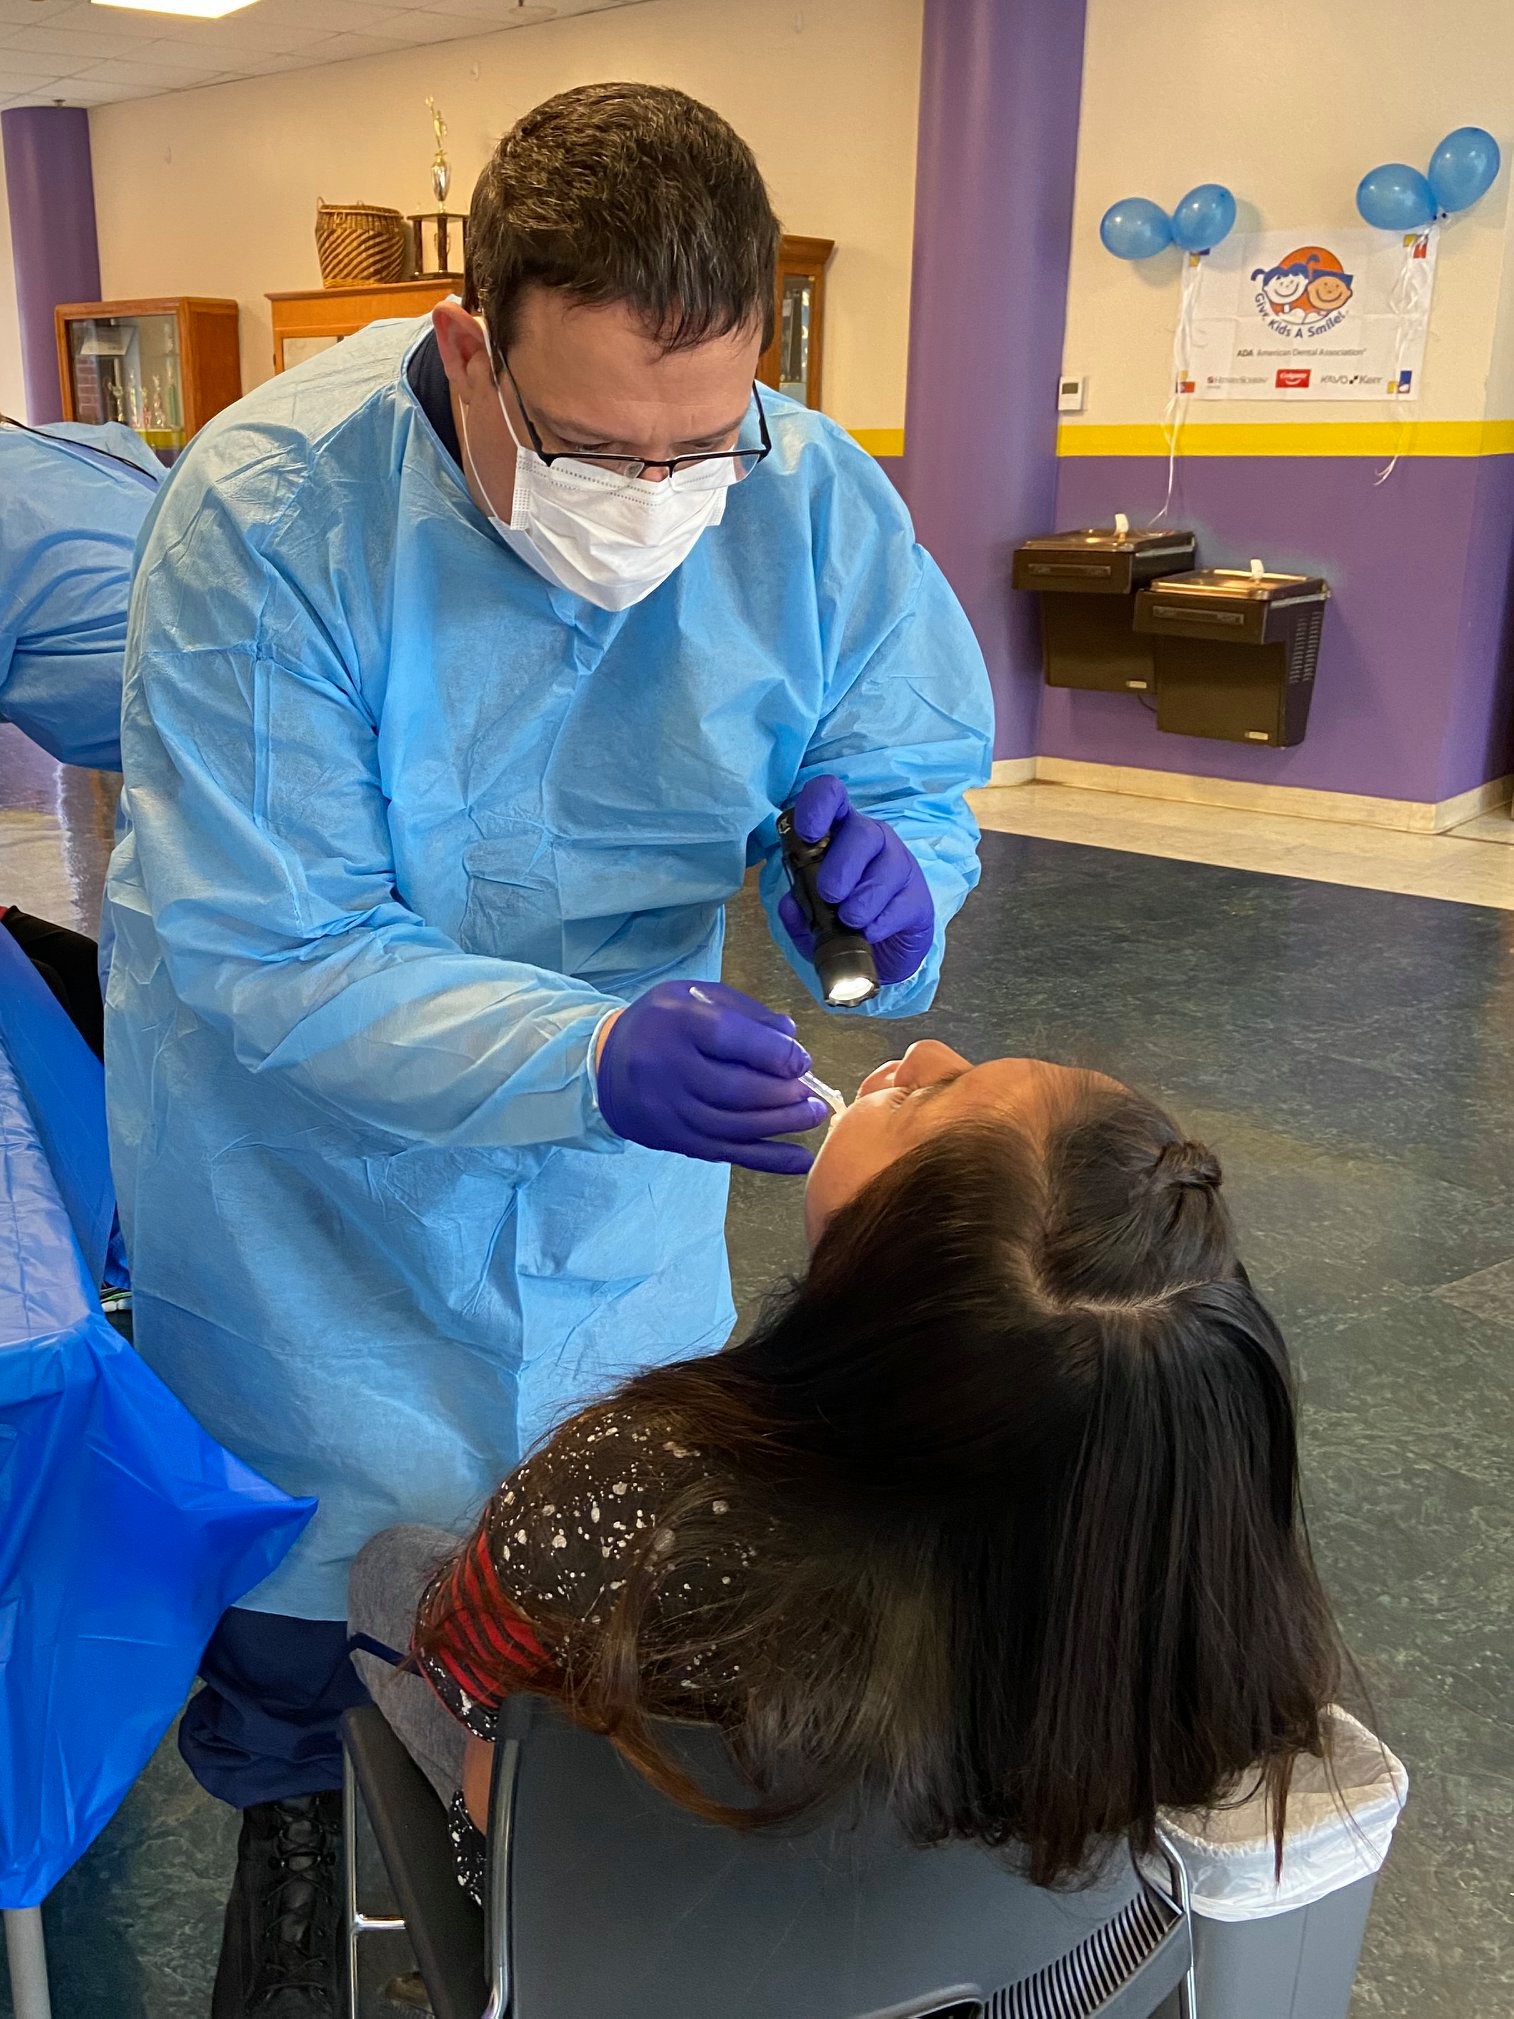 Rear Adm. Ricks providing a dental screening at Choctaw Middle School in Mississippi during a Give Kids A Smile event on February 7, 2020.